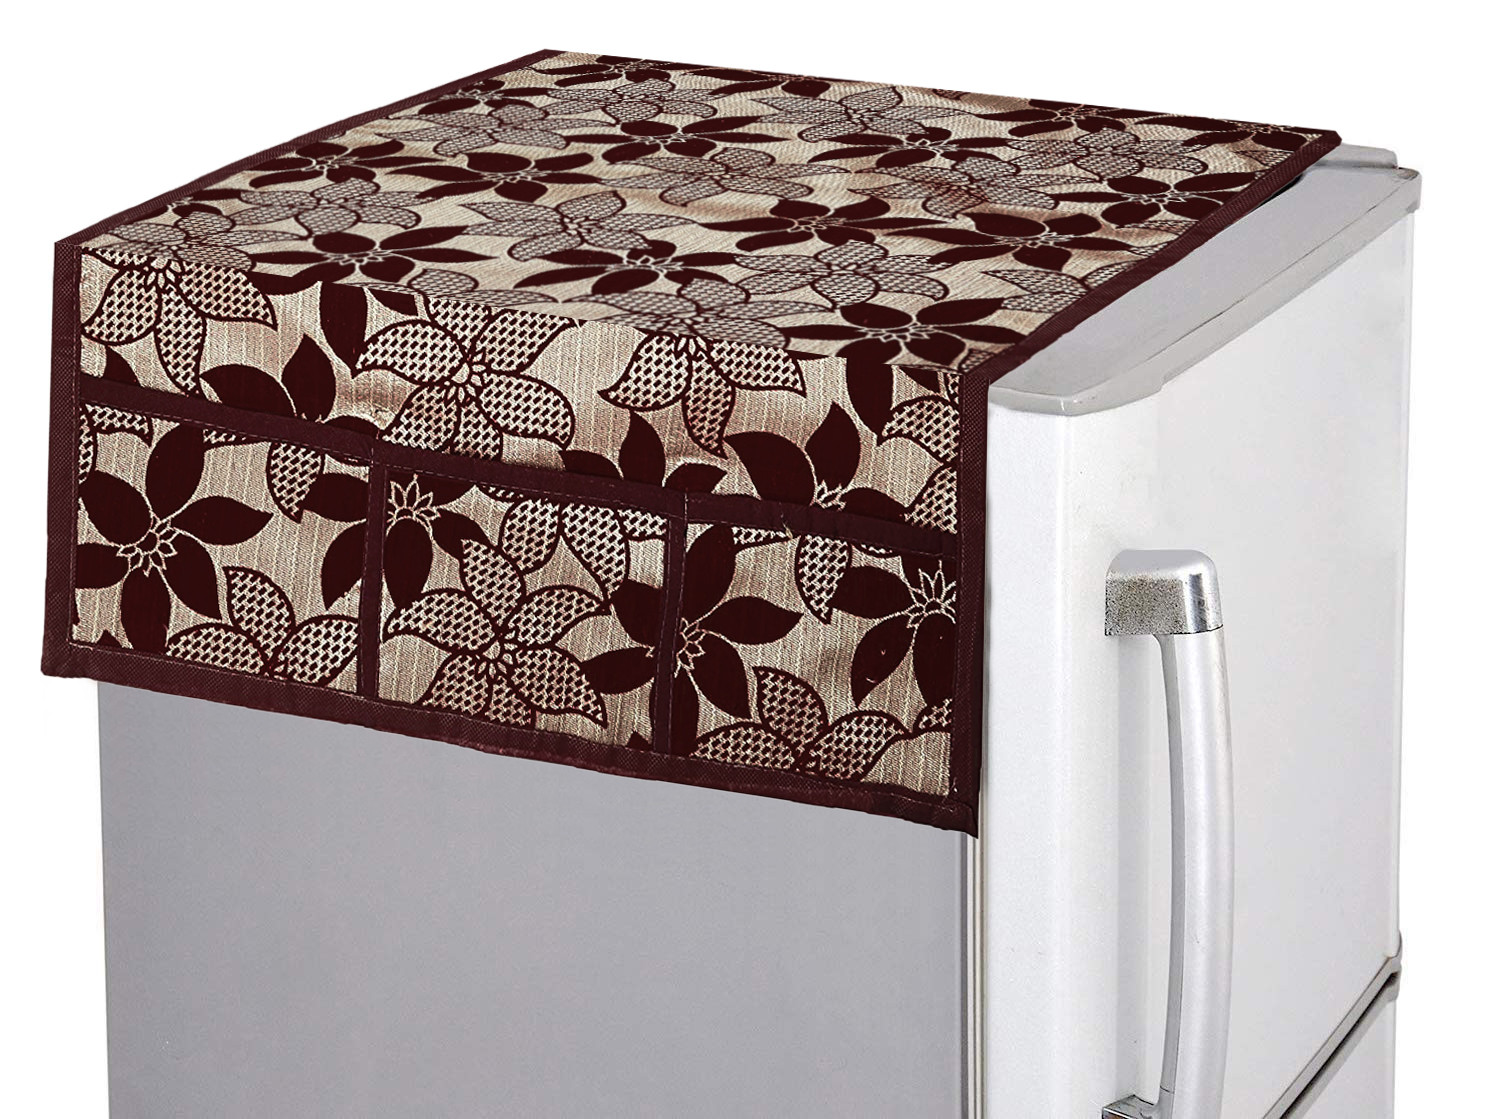 Kuber Industries Flower Design Velvet Fridge, Refrigerator, Side by Side, Double Door Top Cover, Protect For Scratches, Waterproof, Wear & Tear And Dust With 6 Utility Side Pockets (Brown)-HS_38_KUBMART21087